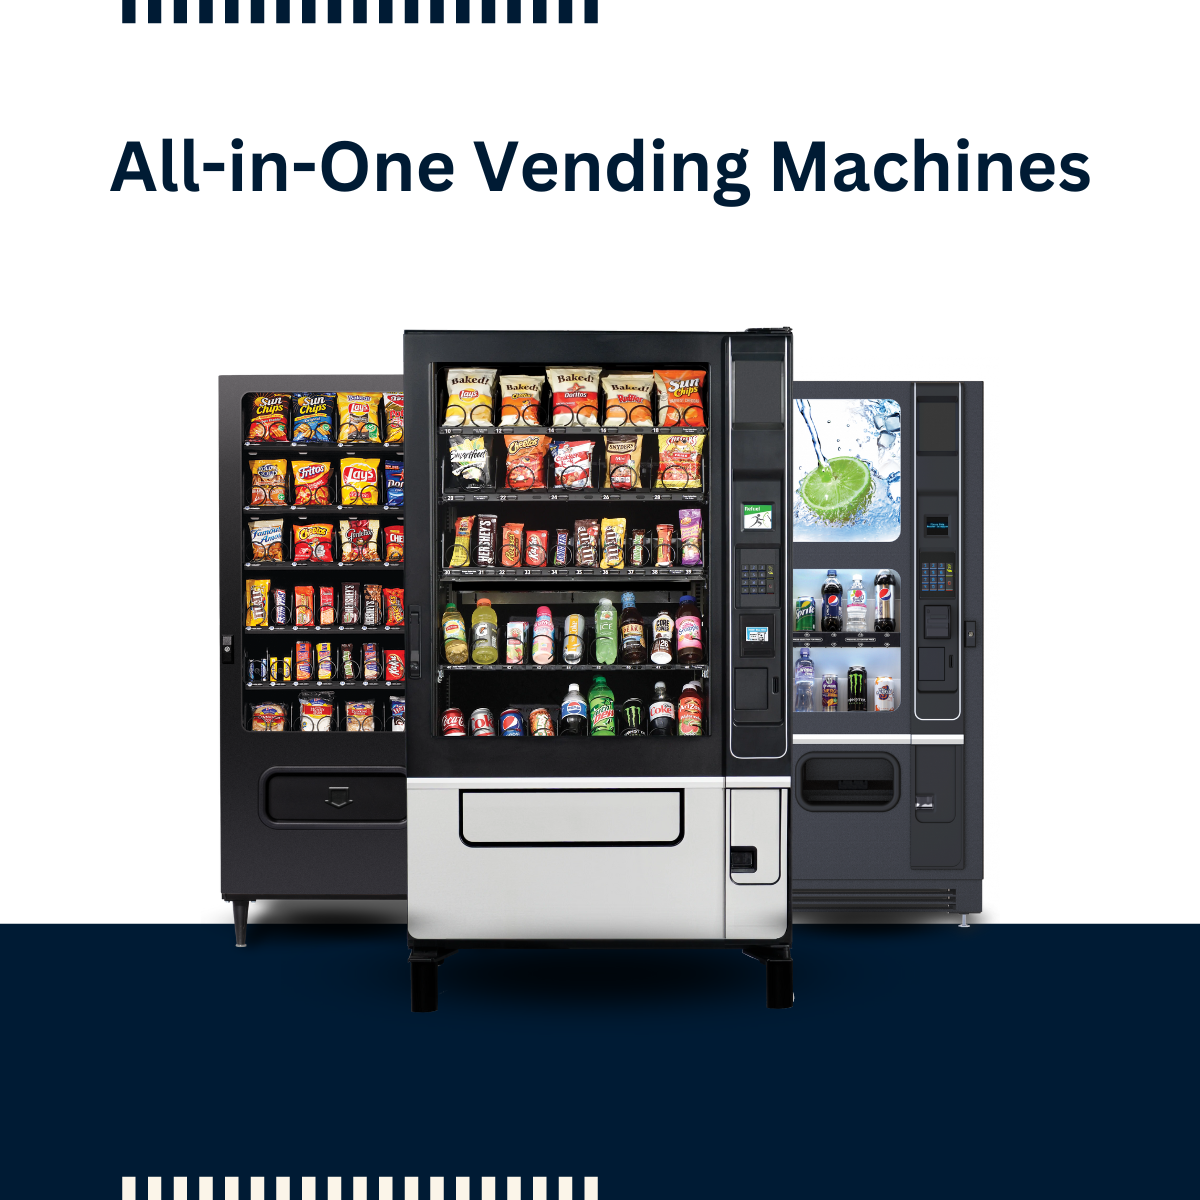 COMBO VENDING MACHINES OFFER AN ALL IN ONE SOLUTION